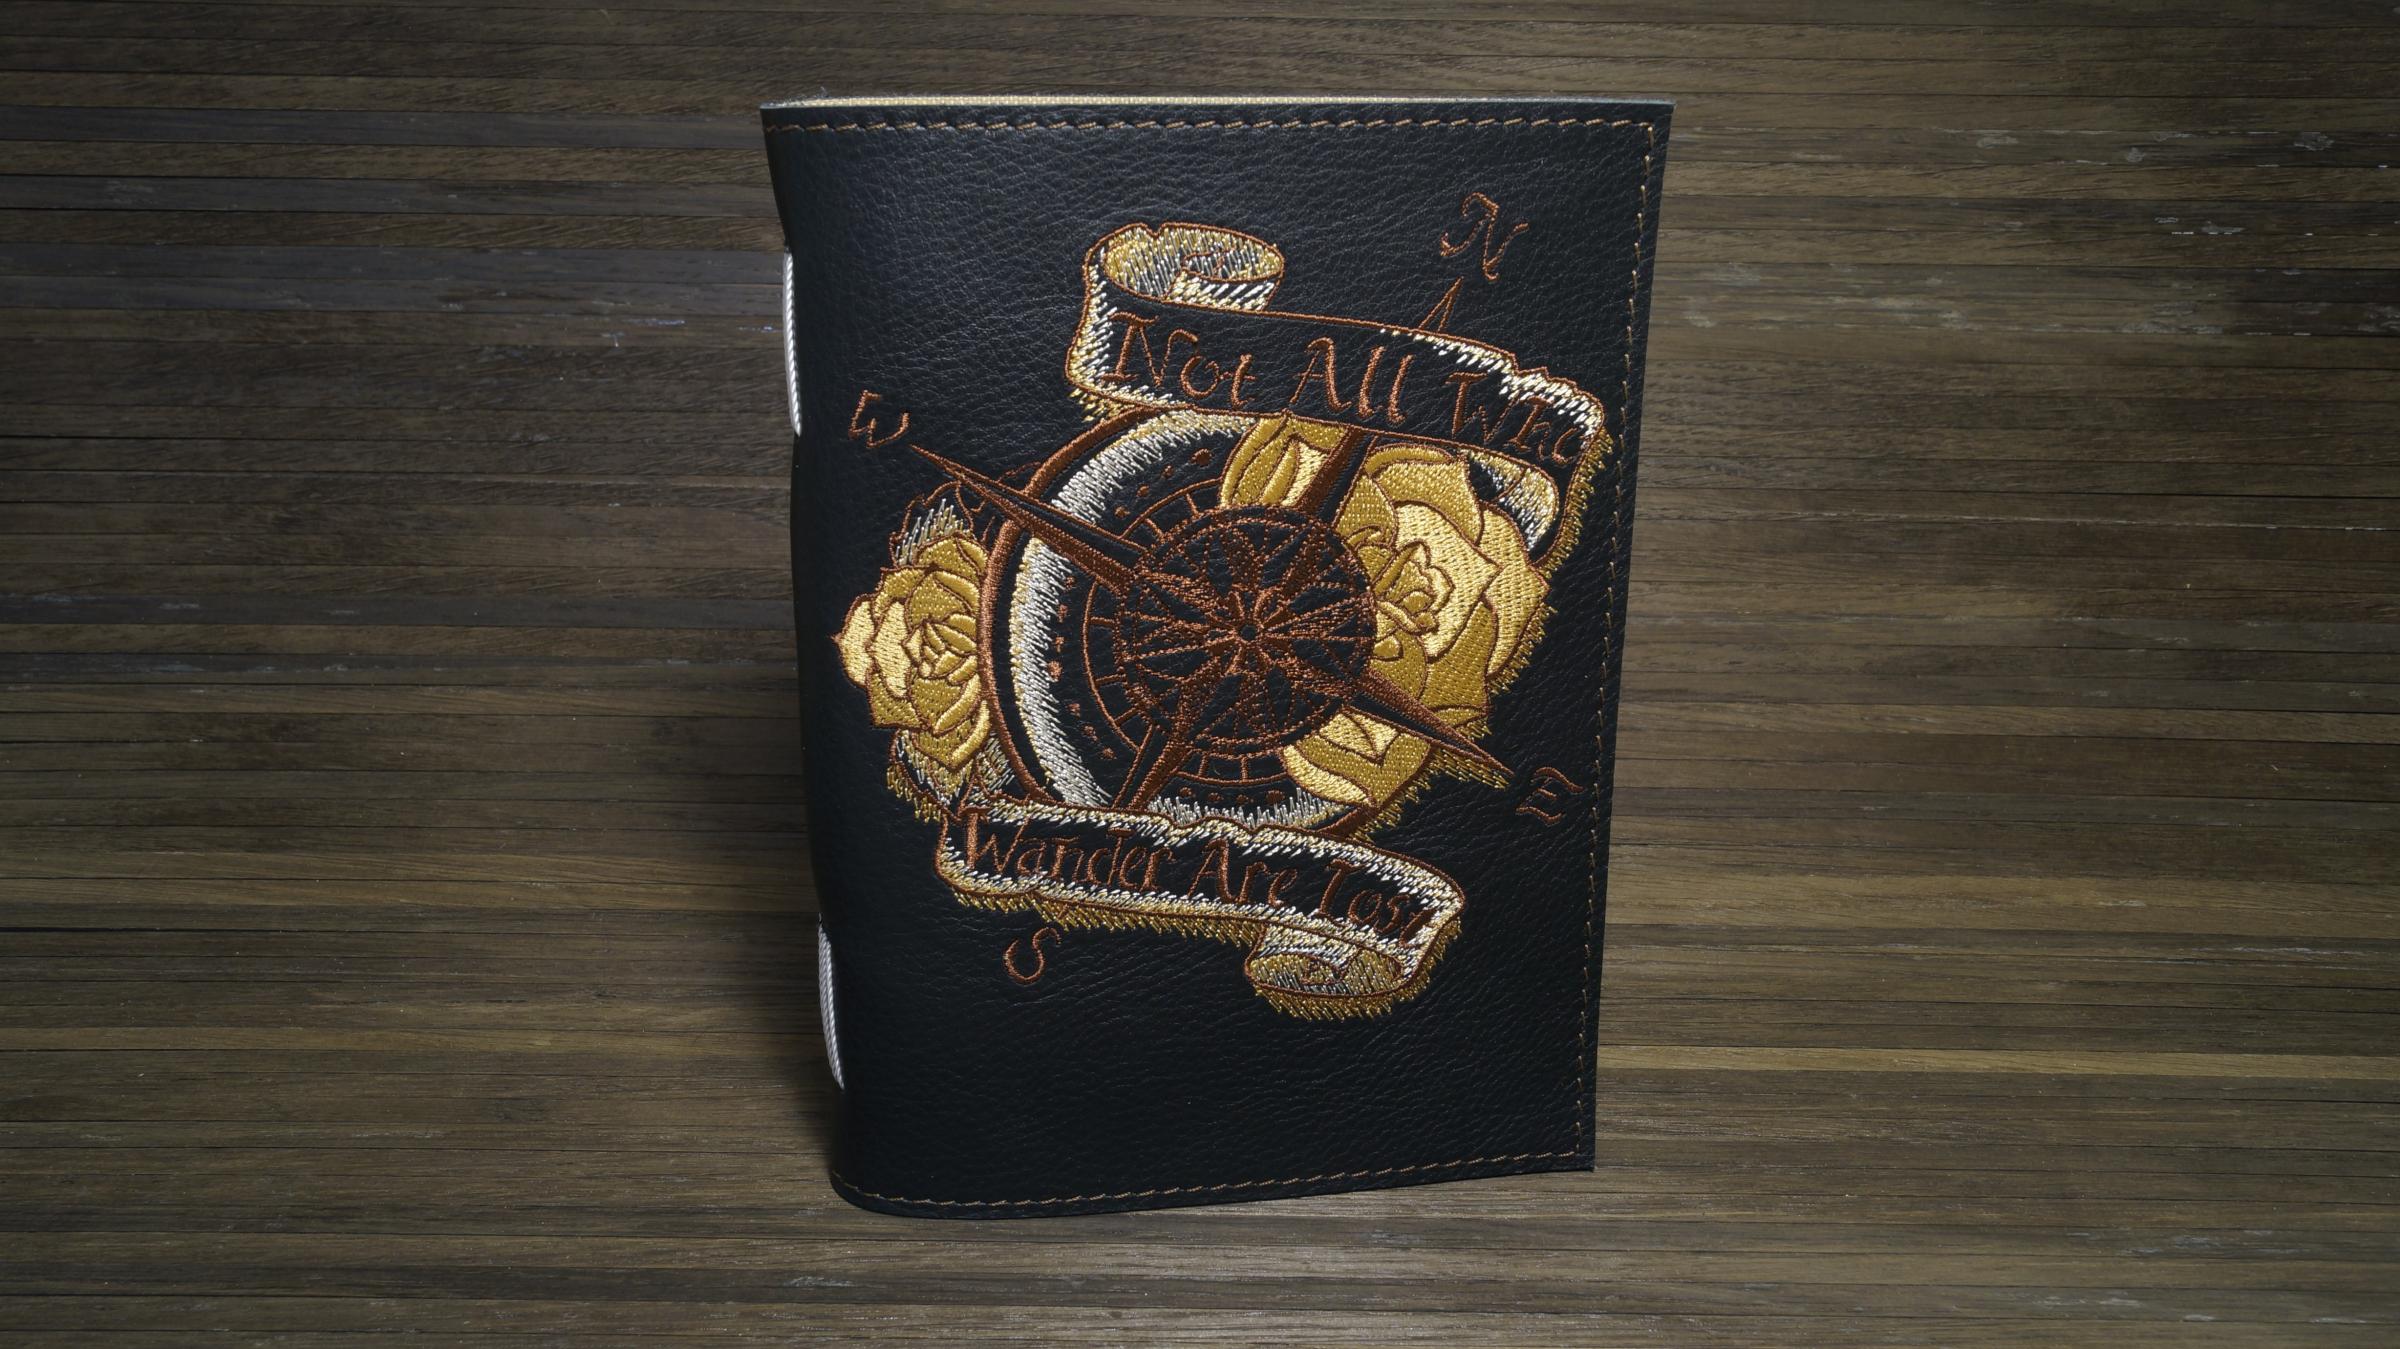 Embroidered leather cover with Rose of winds design